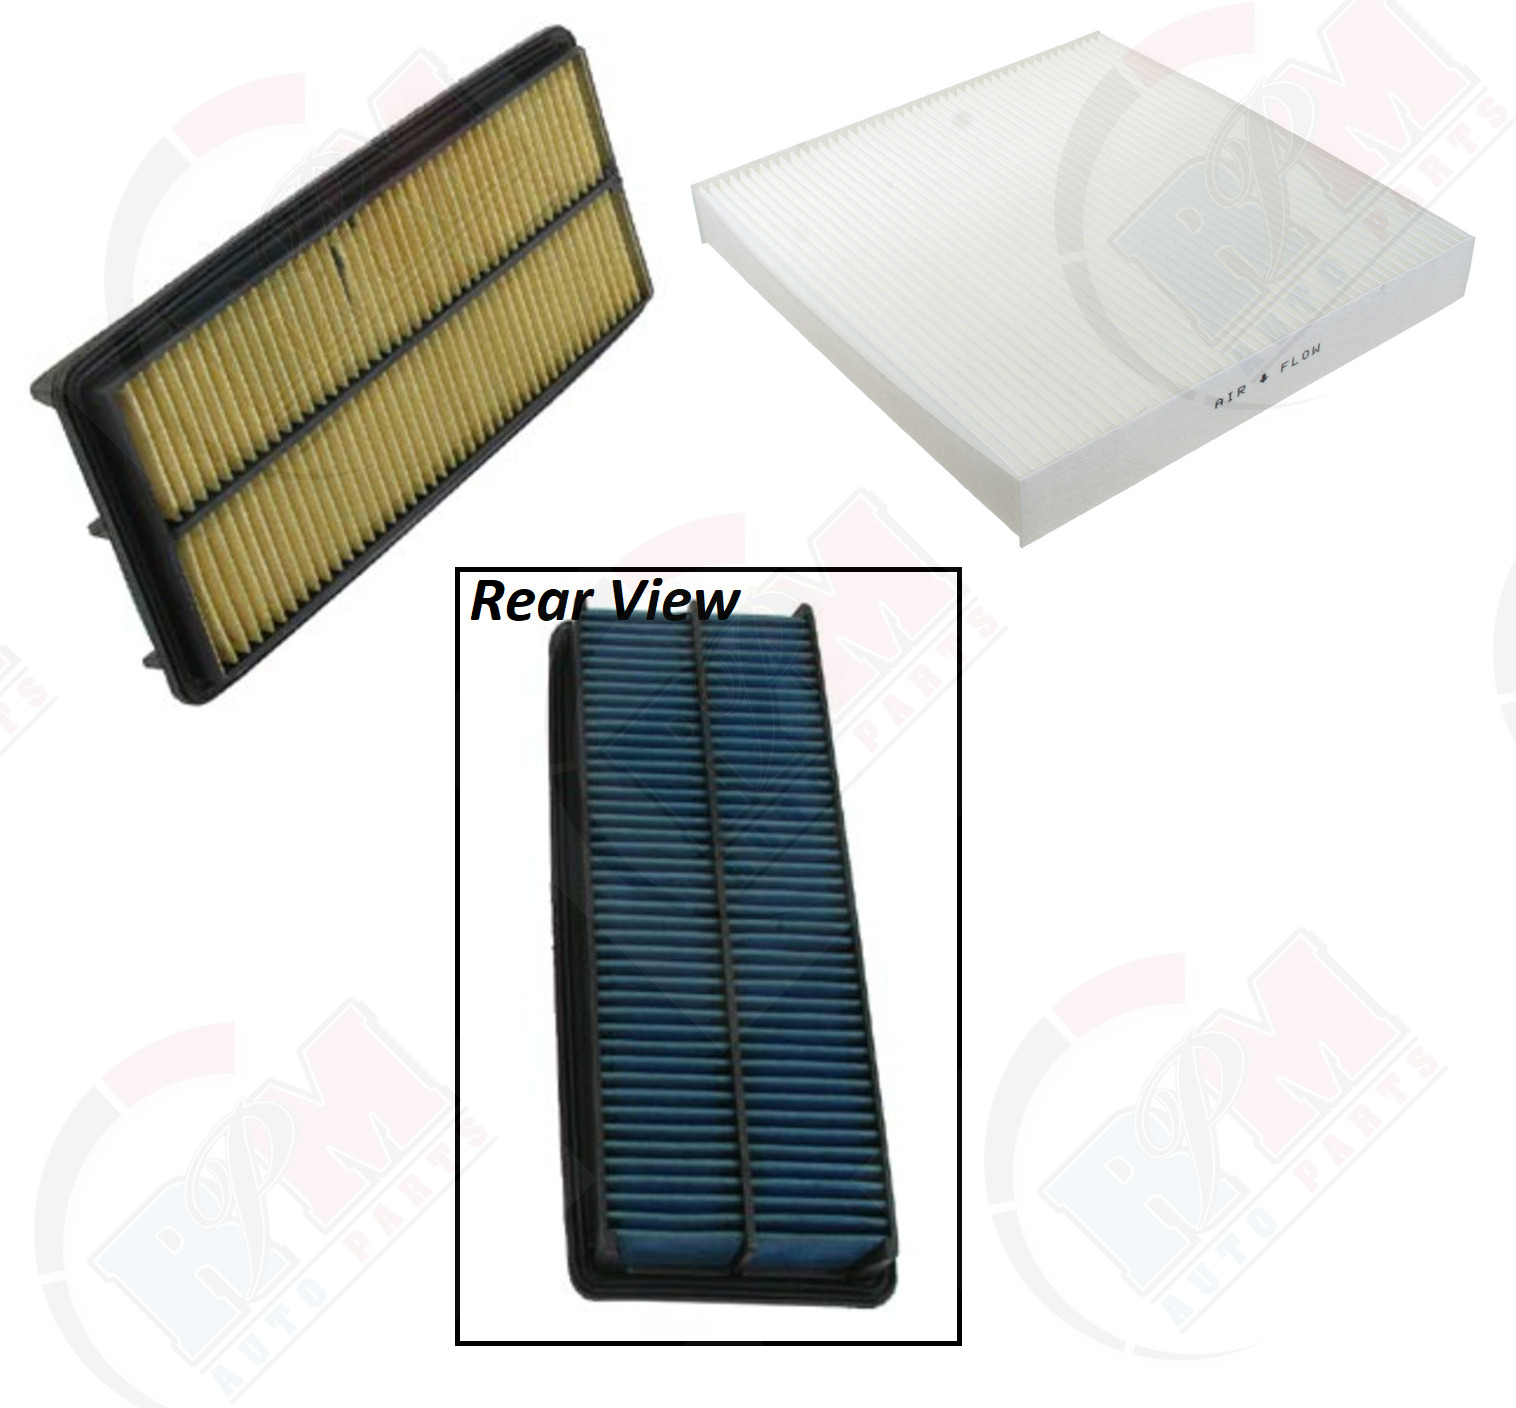 BLUE Air Filter + Cabin Filter for 04-06 for Acura TL 3.2L 05-08 RL Honda Accord